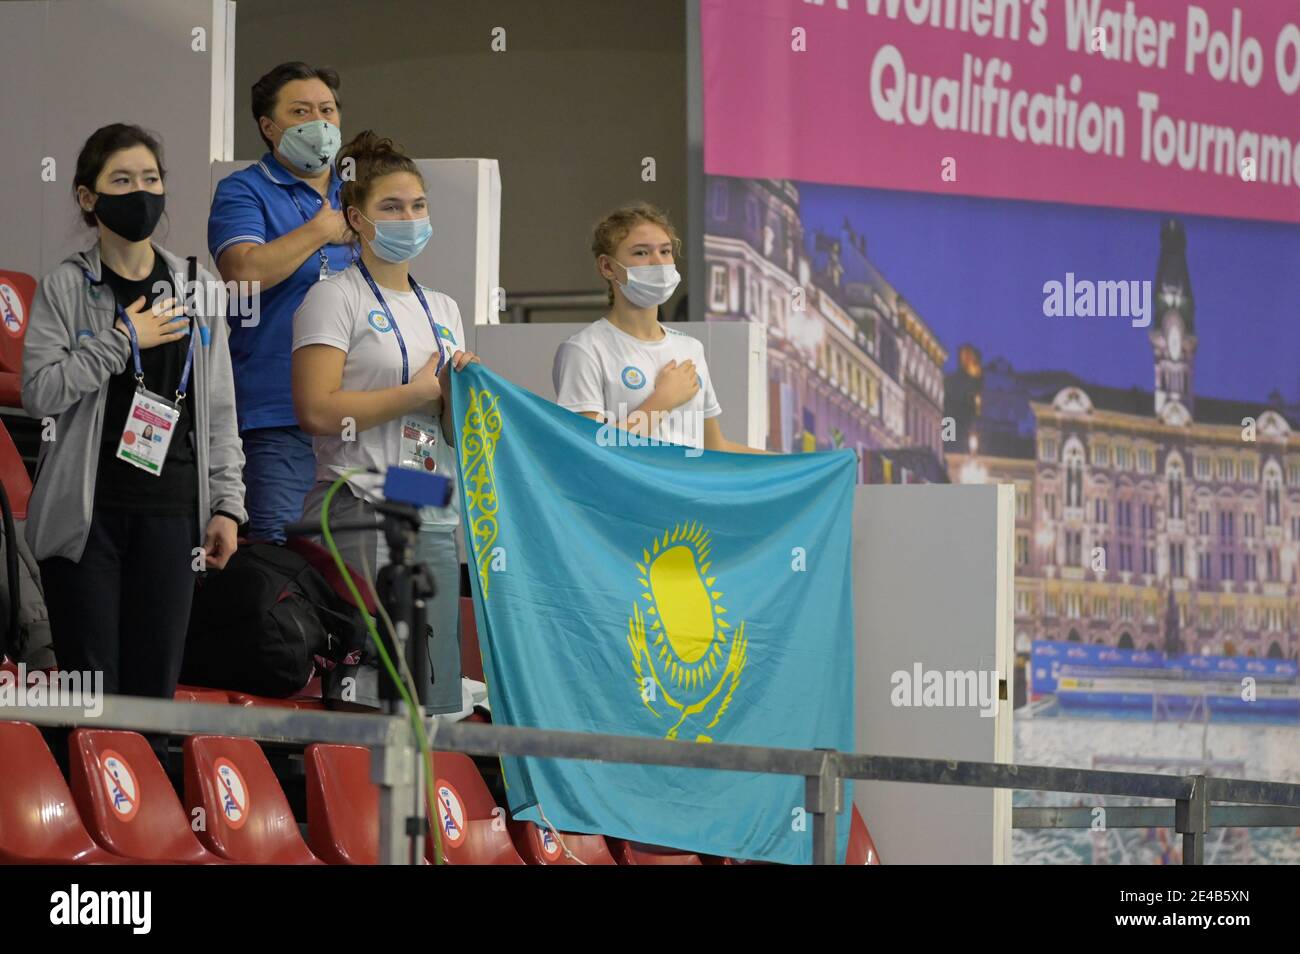 Trieste, Italy. 22nd Jan, 2021. Trieste, Italy, Federal Center B. Bianchi, January 22, 2021, Kazakhstan during Women's Waterpolo Olympic Game Qualification Tournament 2021 - Netherlands vs Kazakhstan - Olympic Games Credit: Marco Todaro/LPS/ZUMA Wire/Alamy Live News Stock Photo